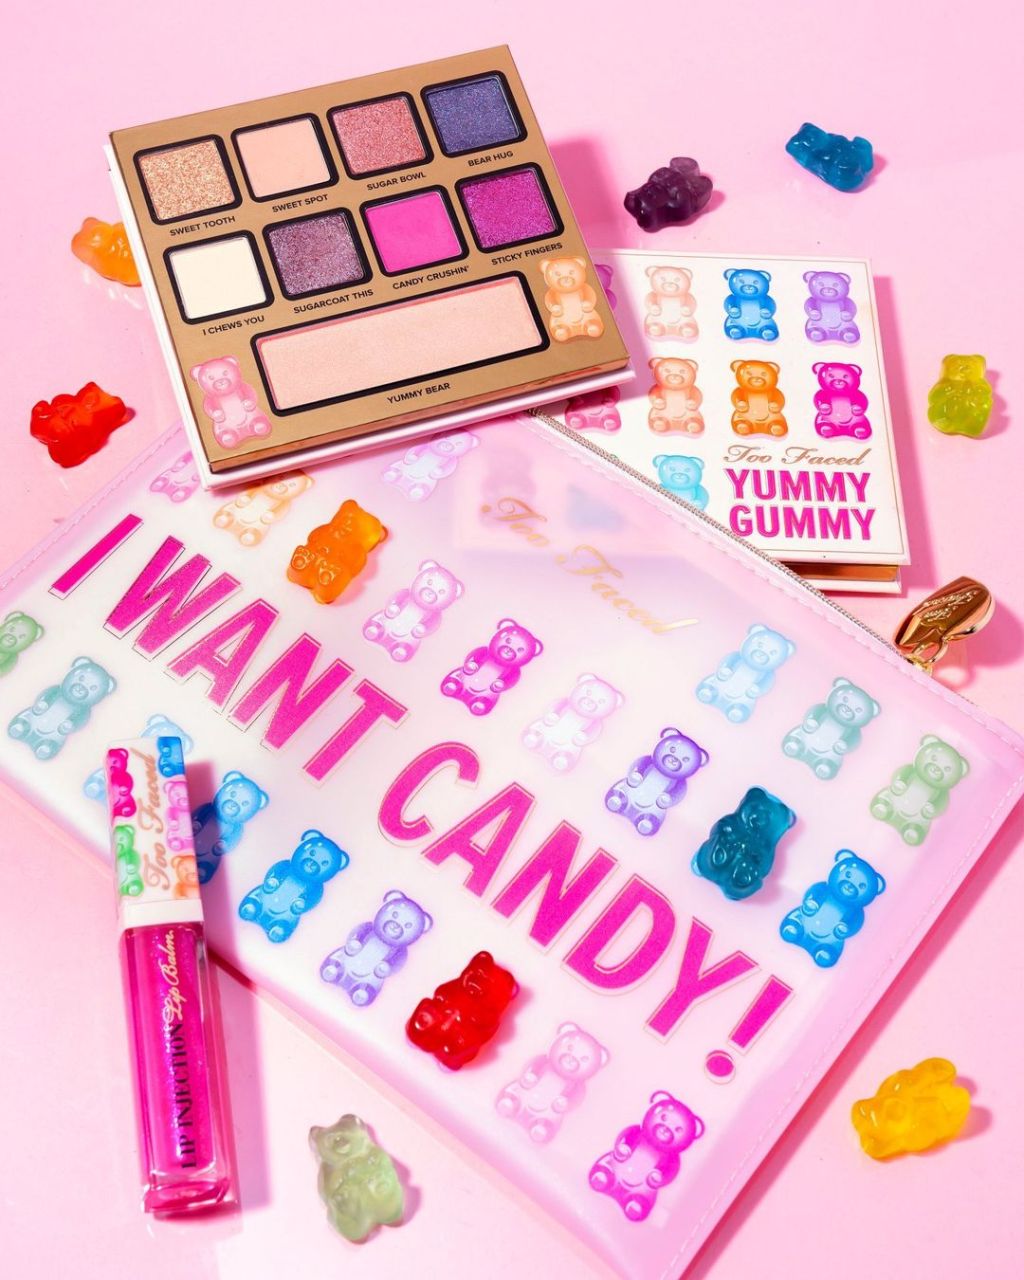 Too Faced Cosmetics Yummy Gummy Makeup Set Only $16.80 Shipped ($122 Value)